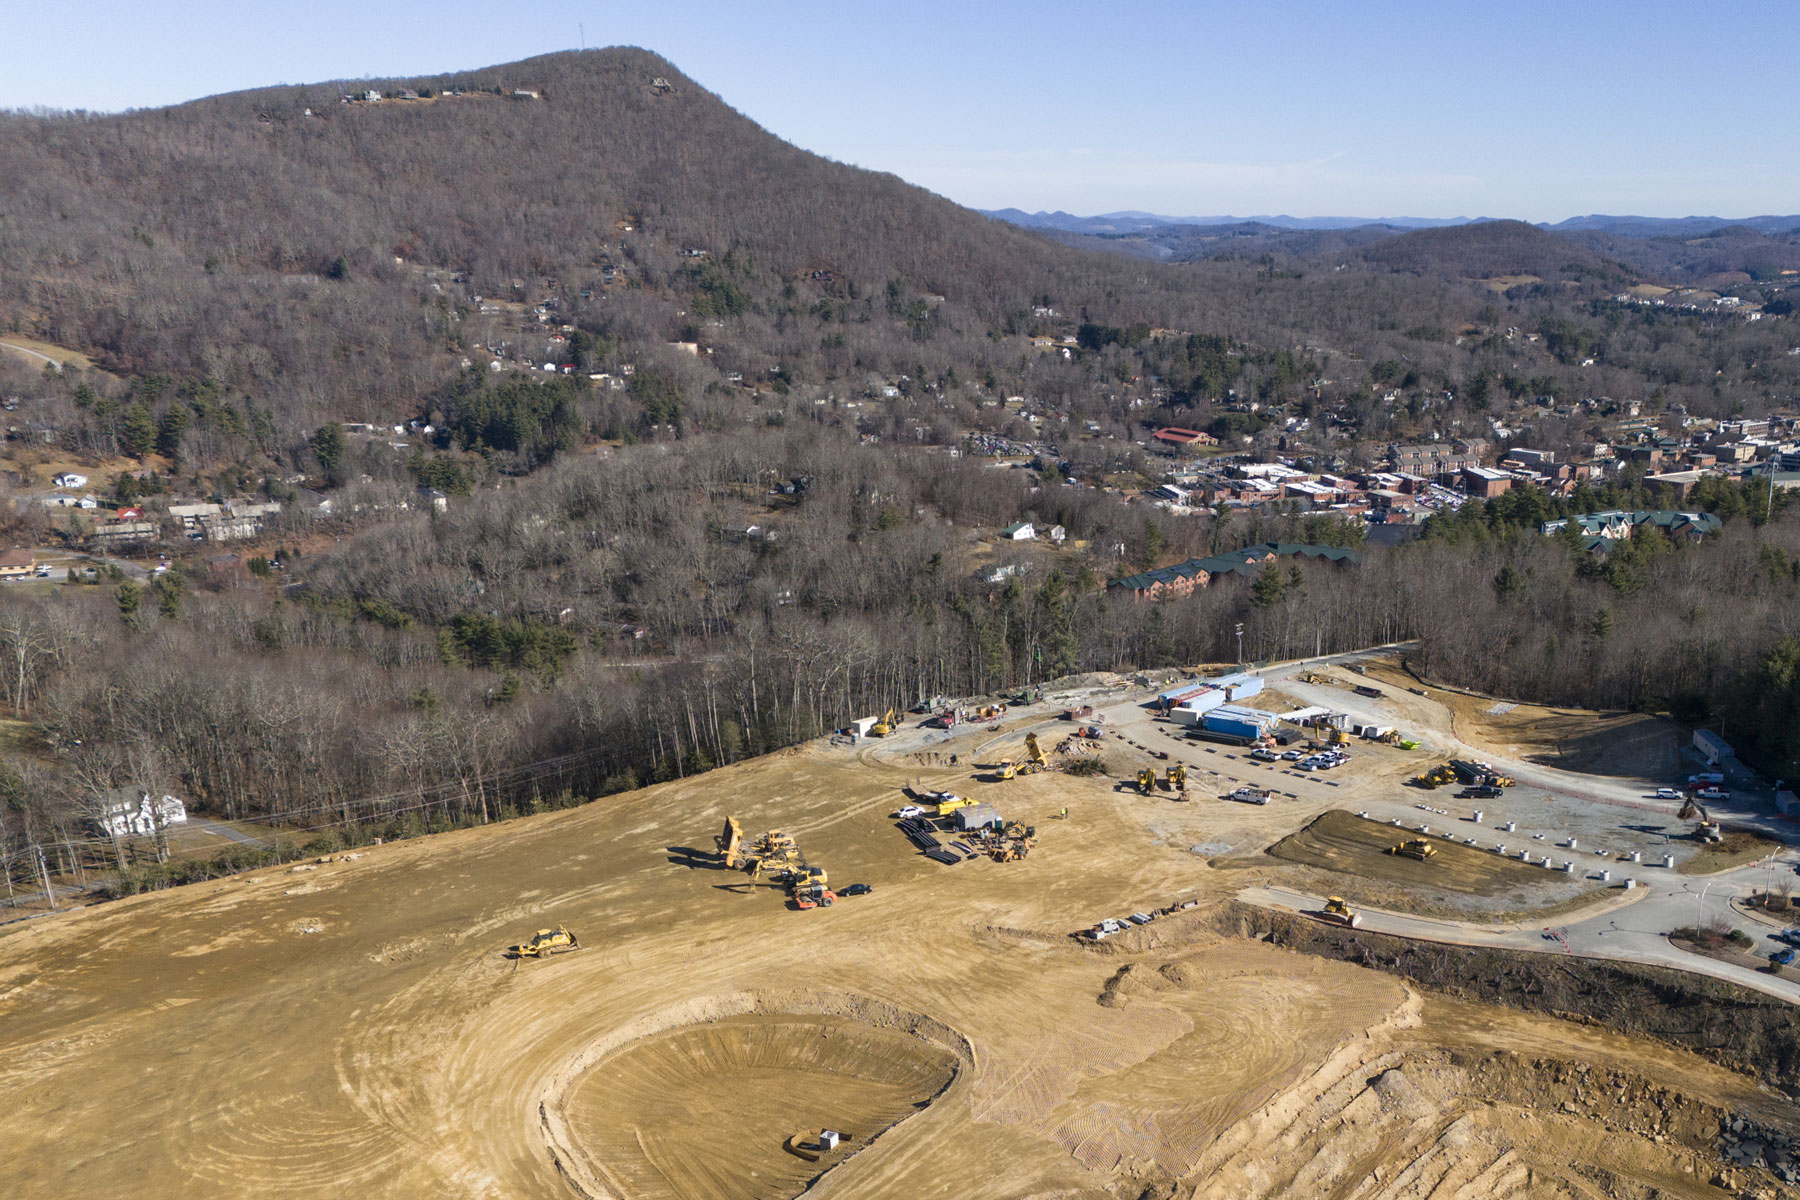 Image shows the construction progress on Phase 1 development of App State's Innovation District